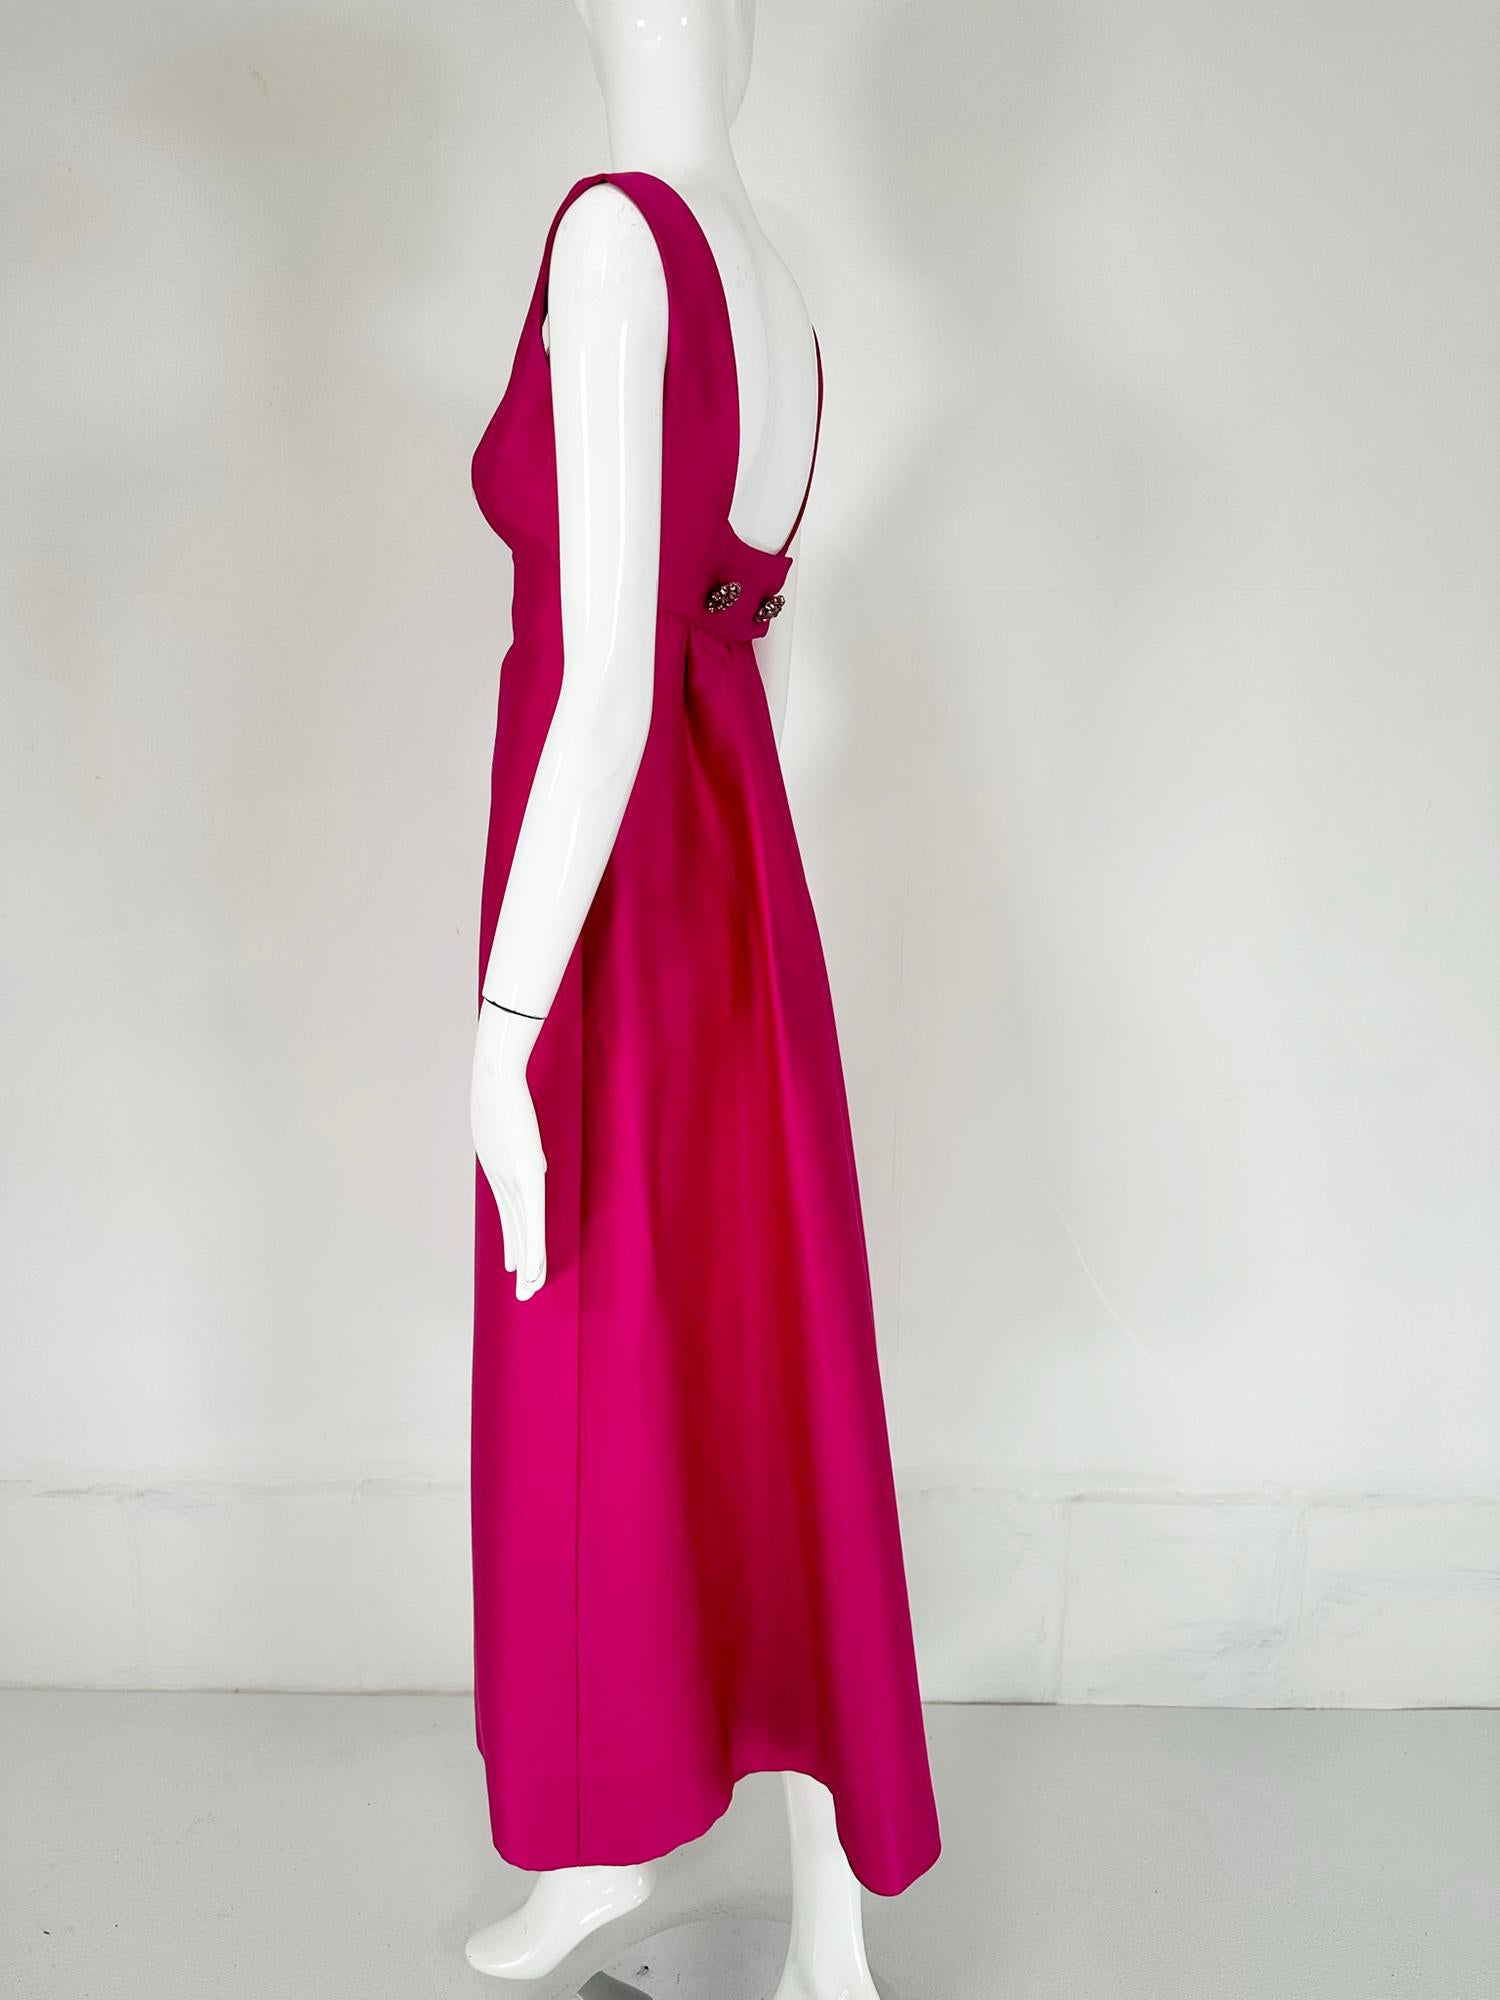 Malcolm Starr Fuchsia Pink Silk Twill Evening Dress Early 1960s For Sale 4